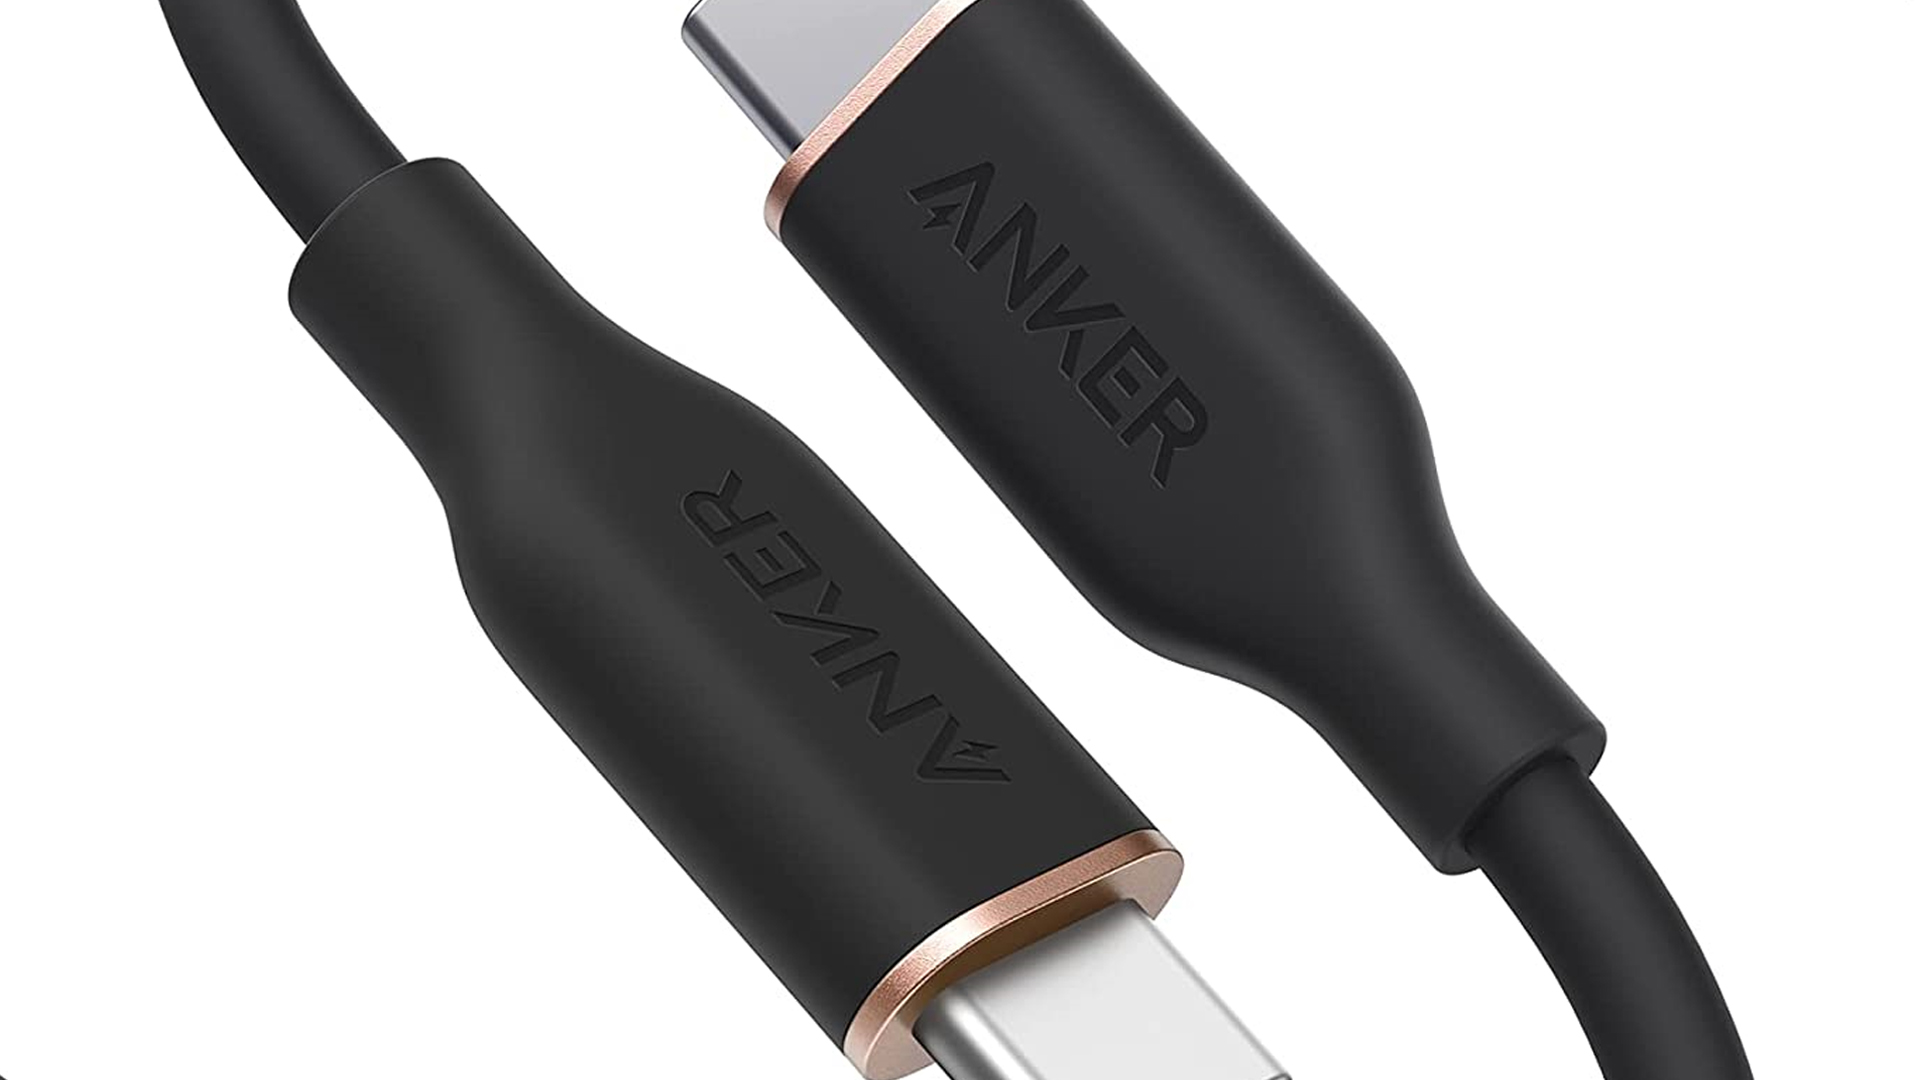 The Anker 643 USB-C cable